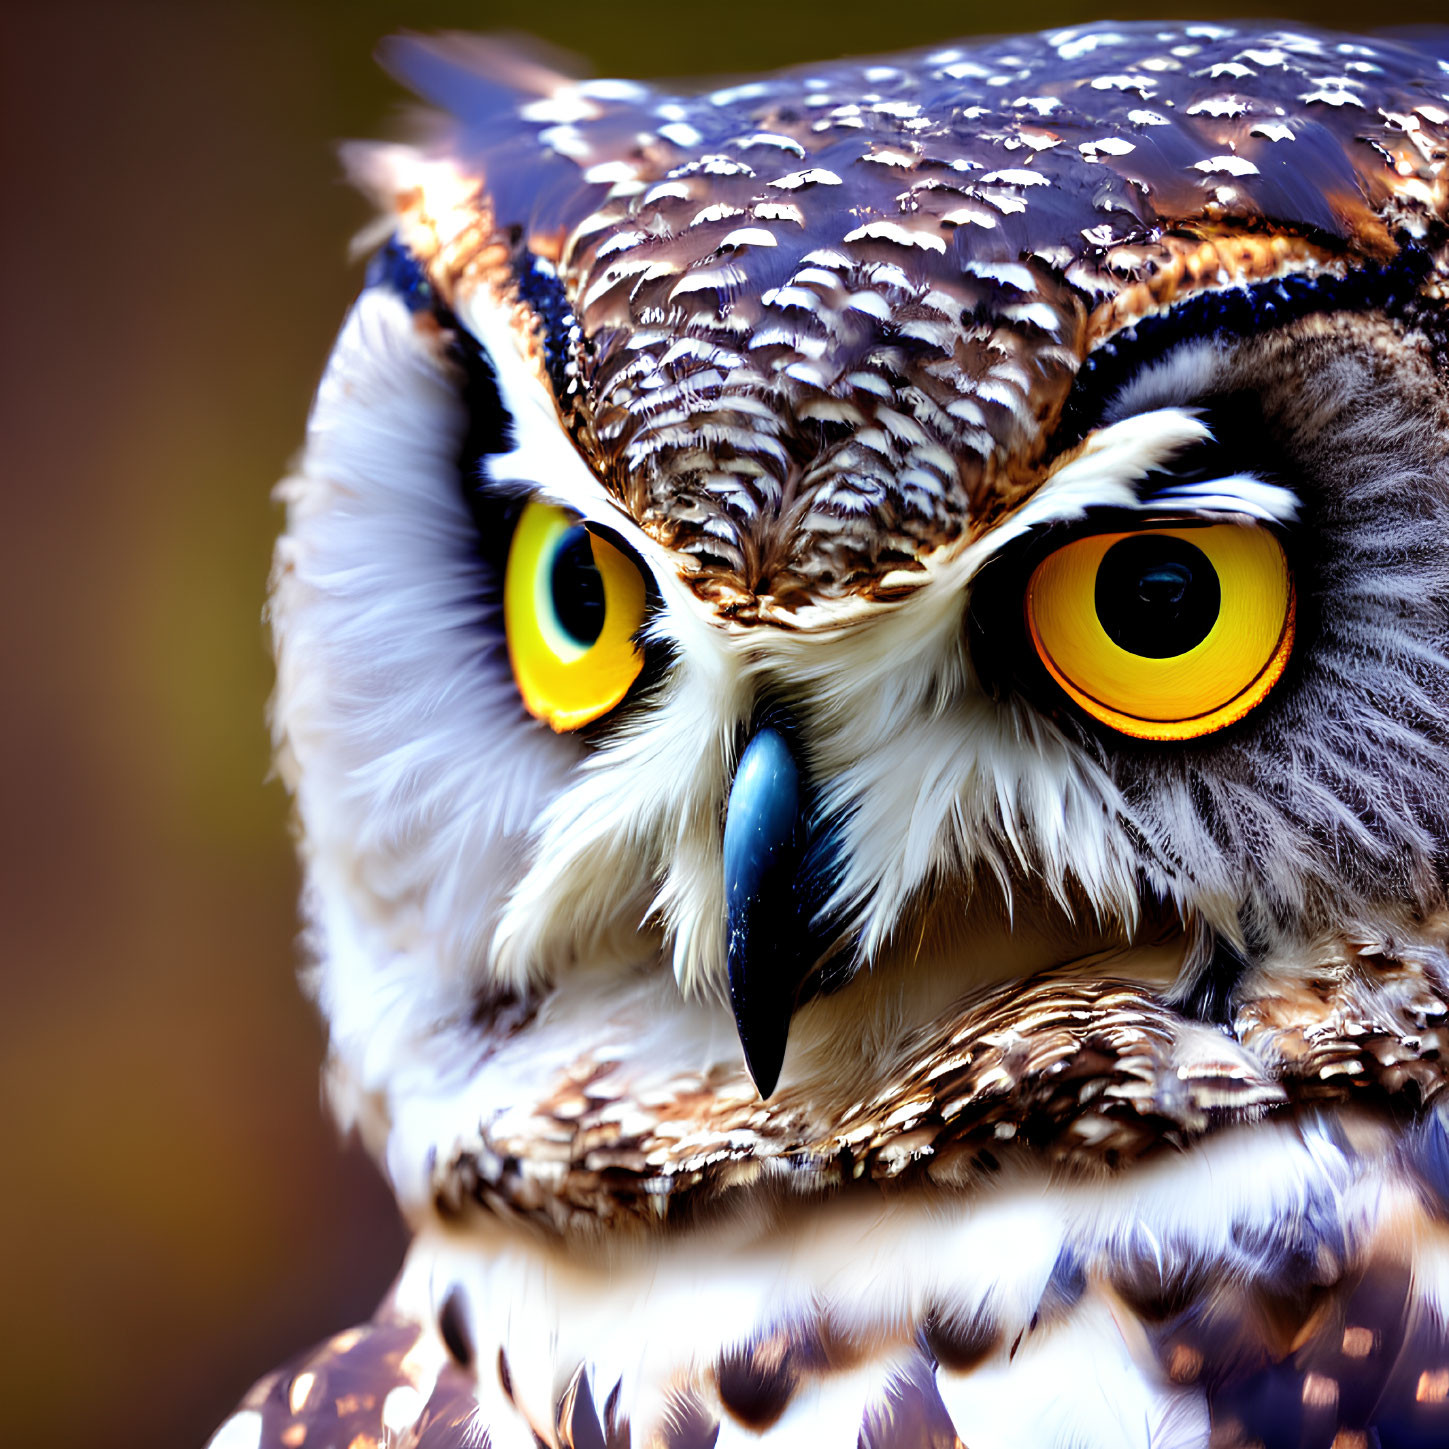 Majestic owl with piercing yellow eyes and intricate feathers.